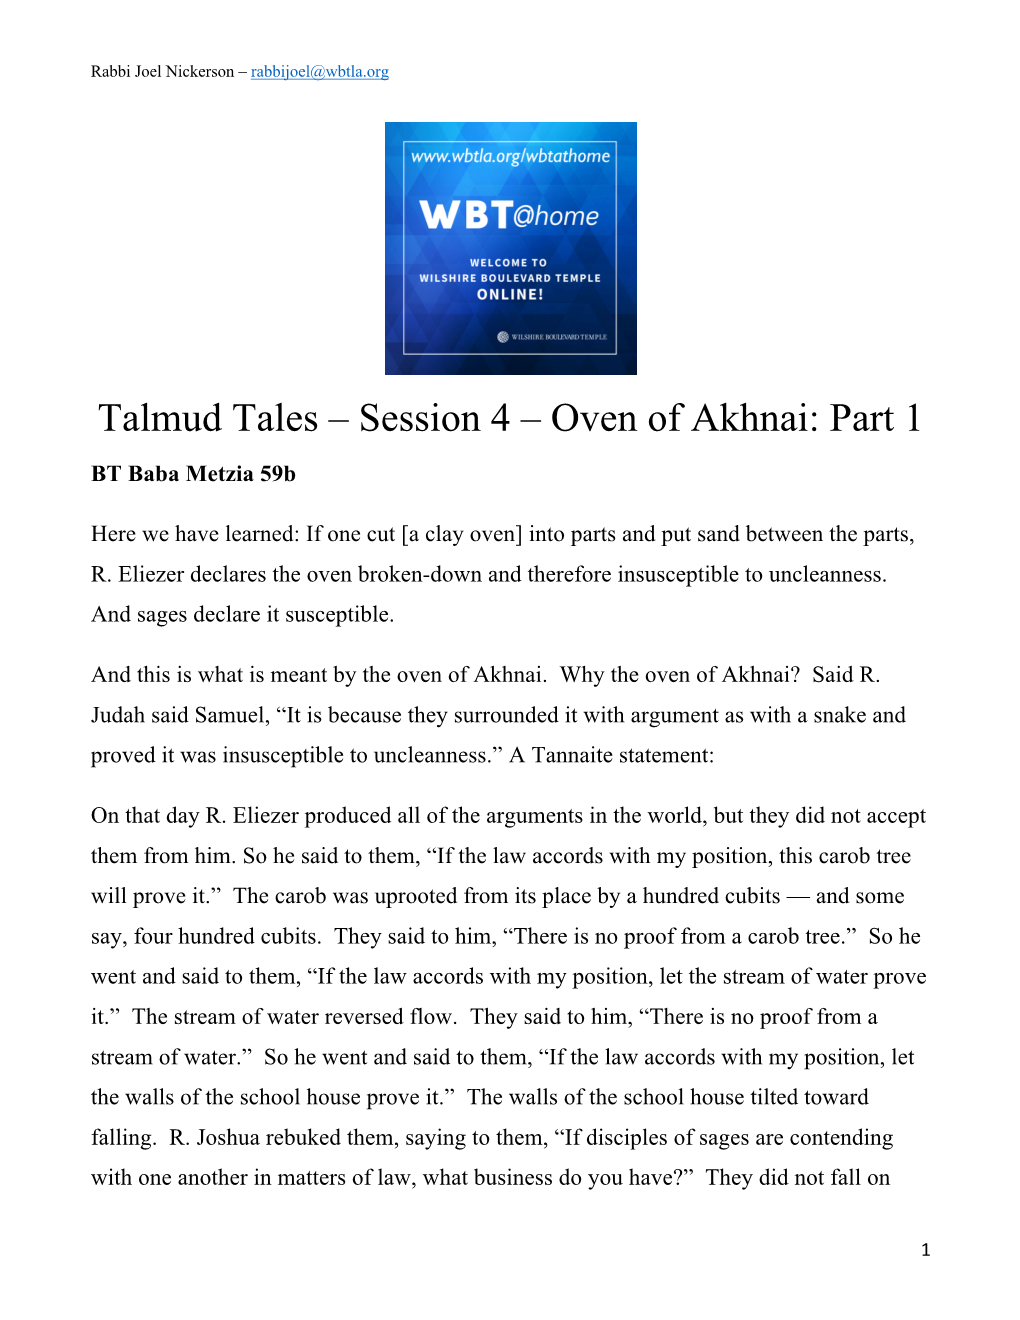 Talmud Tales – Session 4 – Oven of Akhnai: Part 1